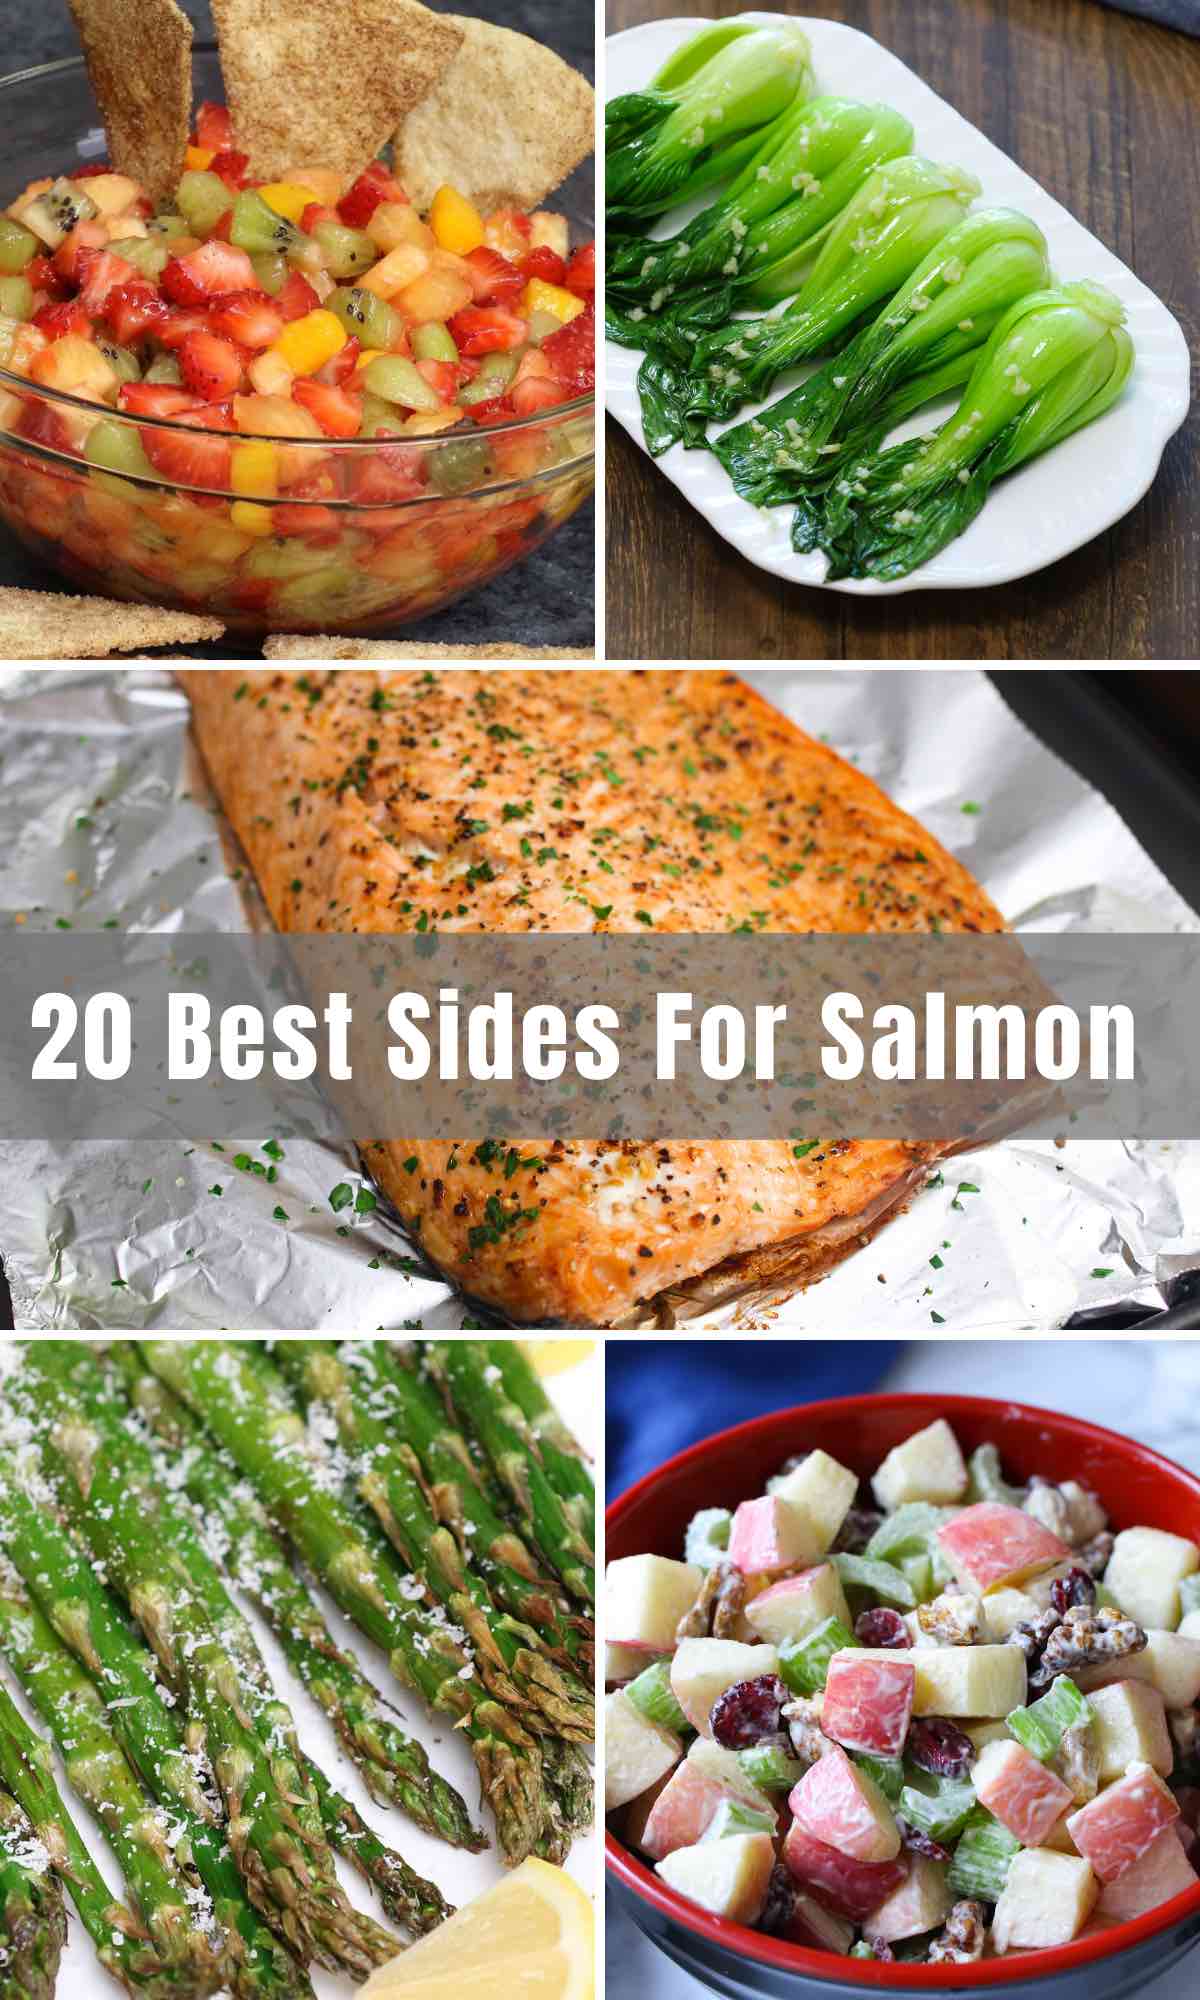 Salmon is a classic, delicious, and healthy dinner option that’s very easy to make. Check out these great sides for salmon that compliment this suppertime staple. Fish is super versatile and goes well with vegetables, pasta or grains. Salmon is no different! All you have to do is decide between a healthy side dish and a hearty side dish! 